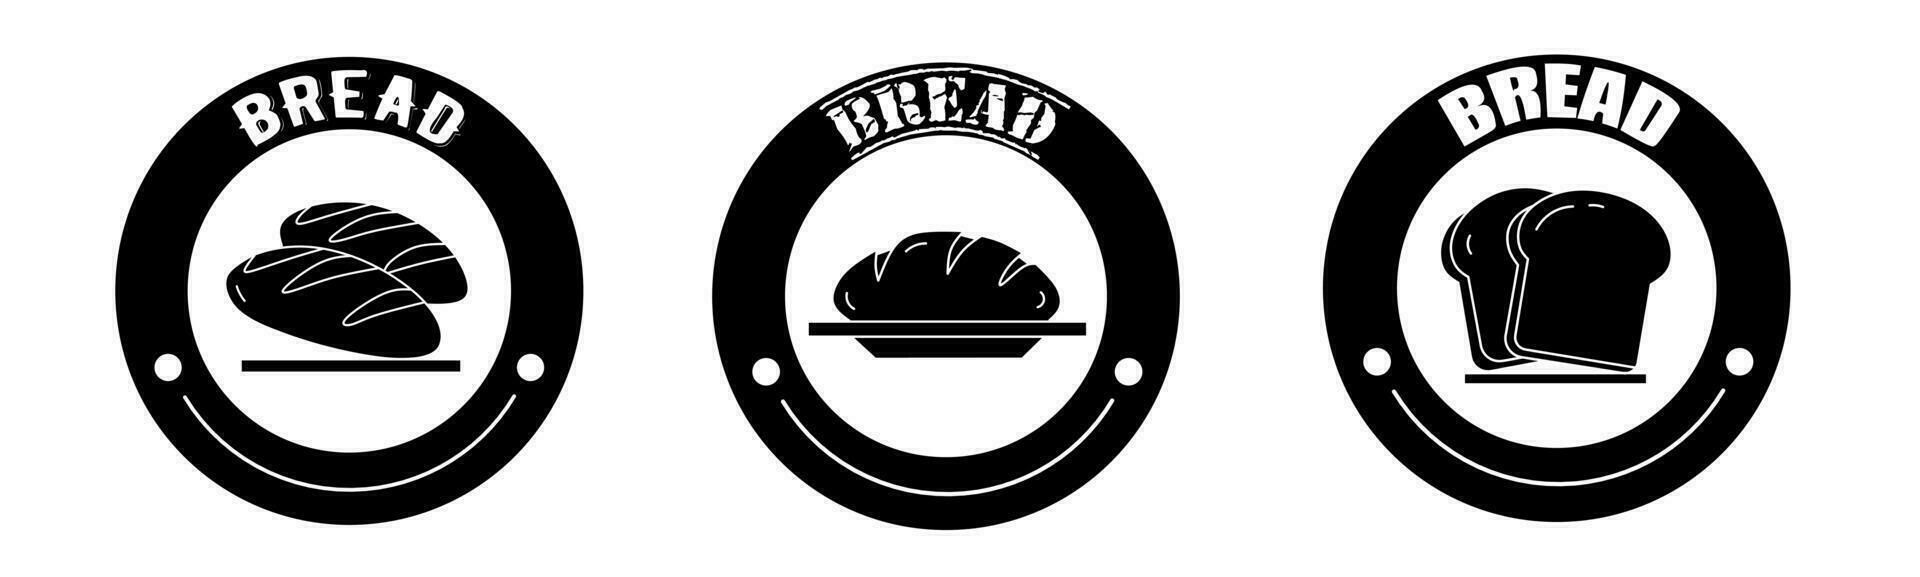 Bread product sale icon vector illustration. Design for shop and sale banner business.